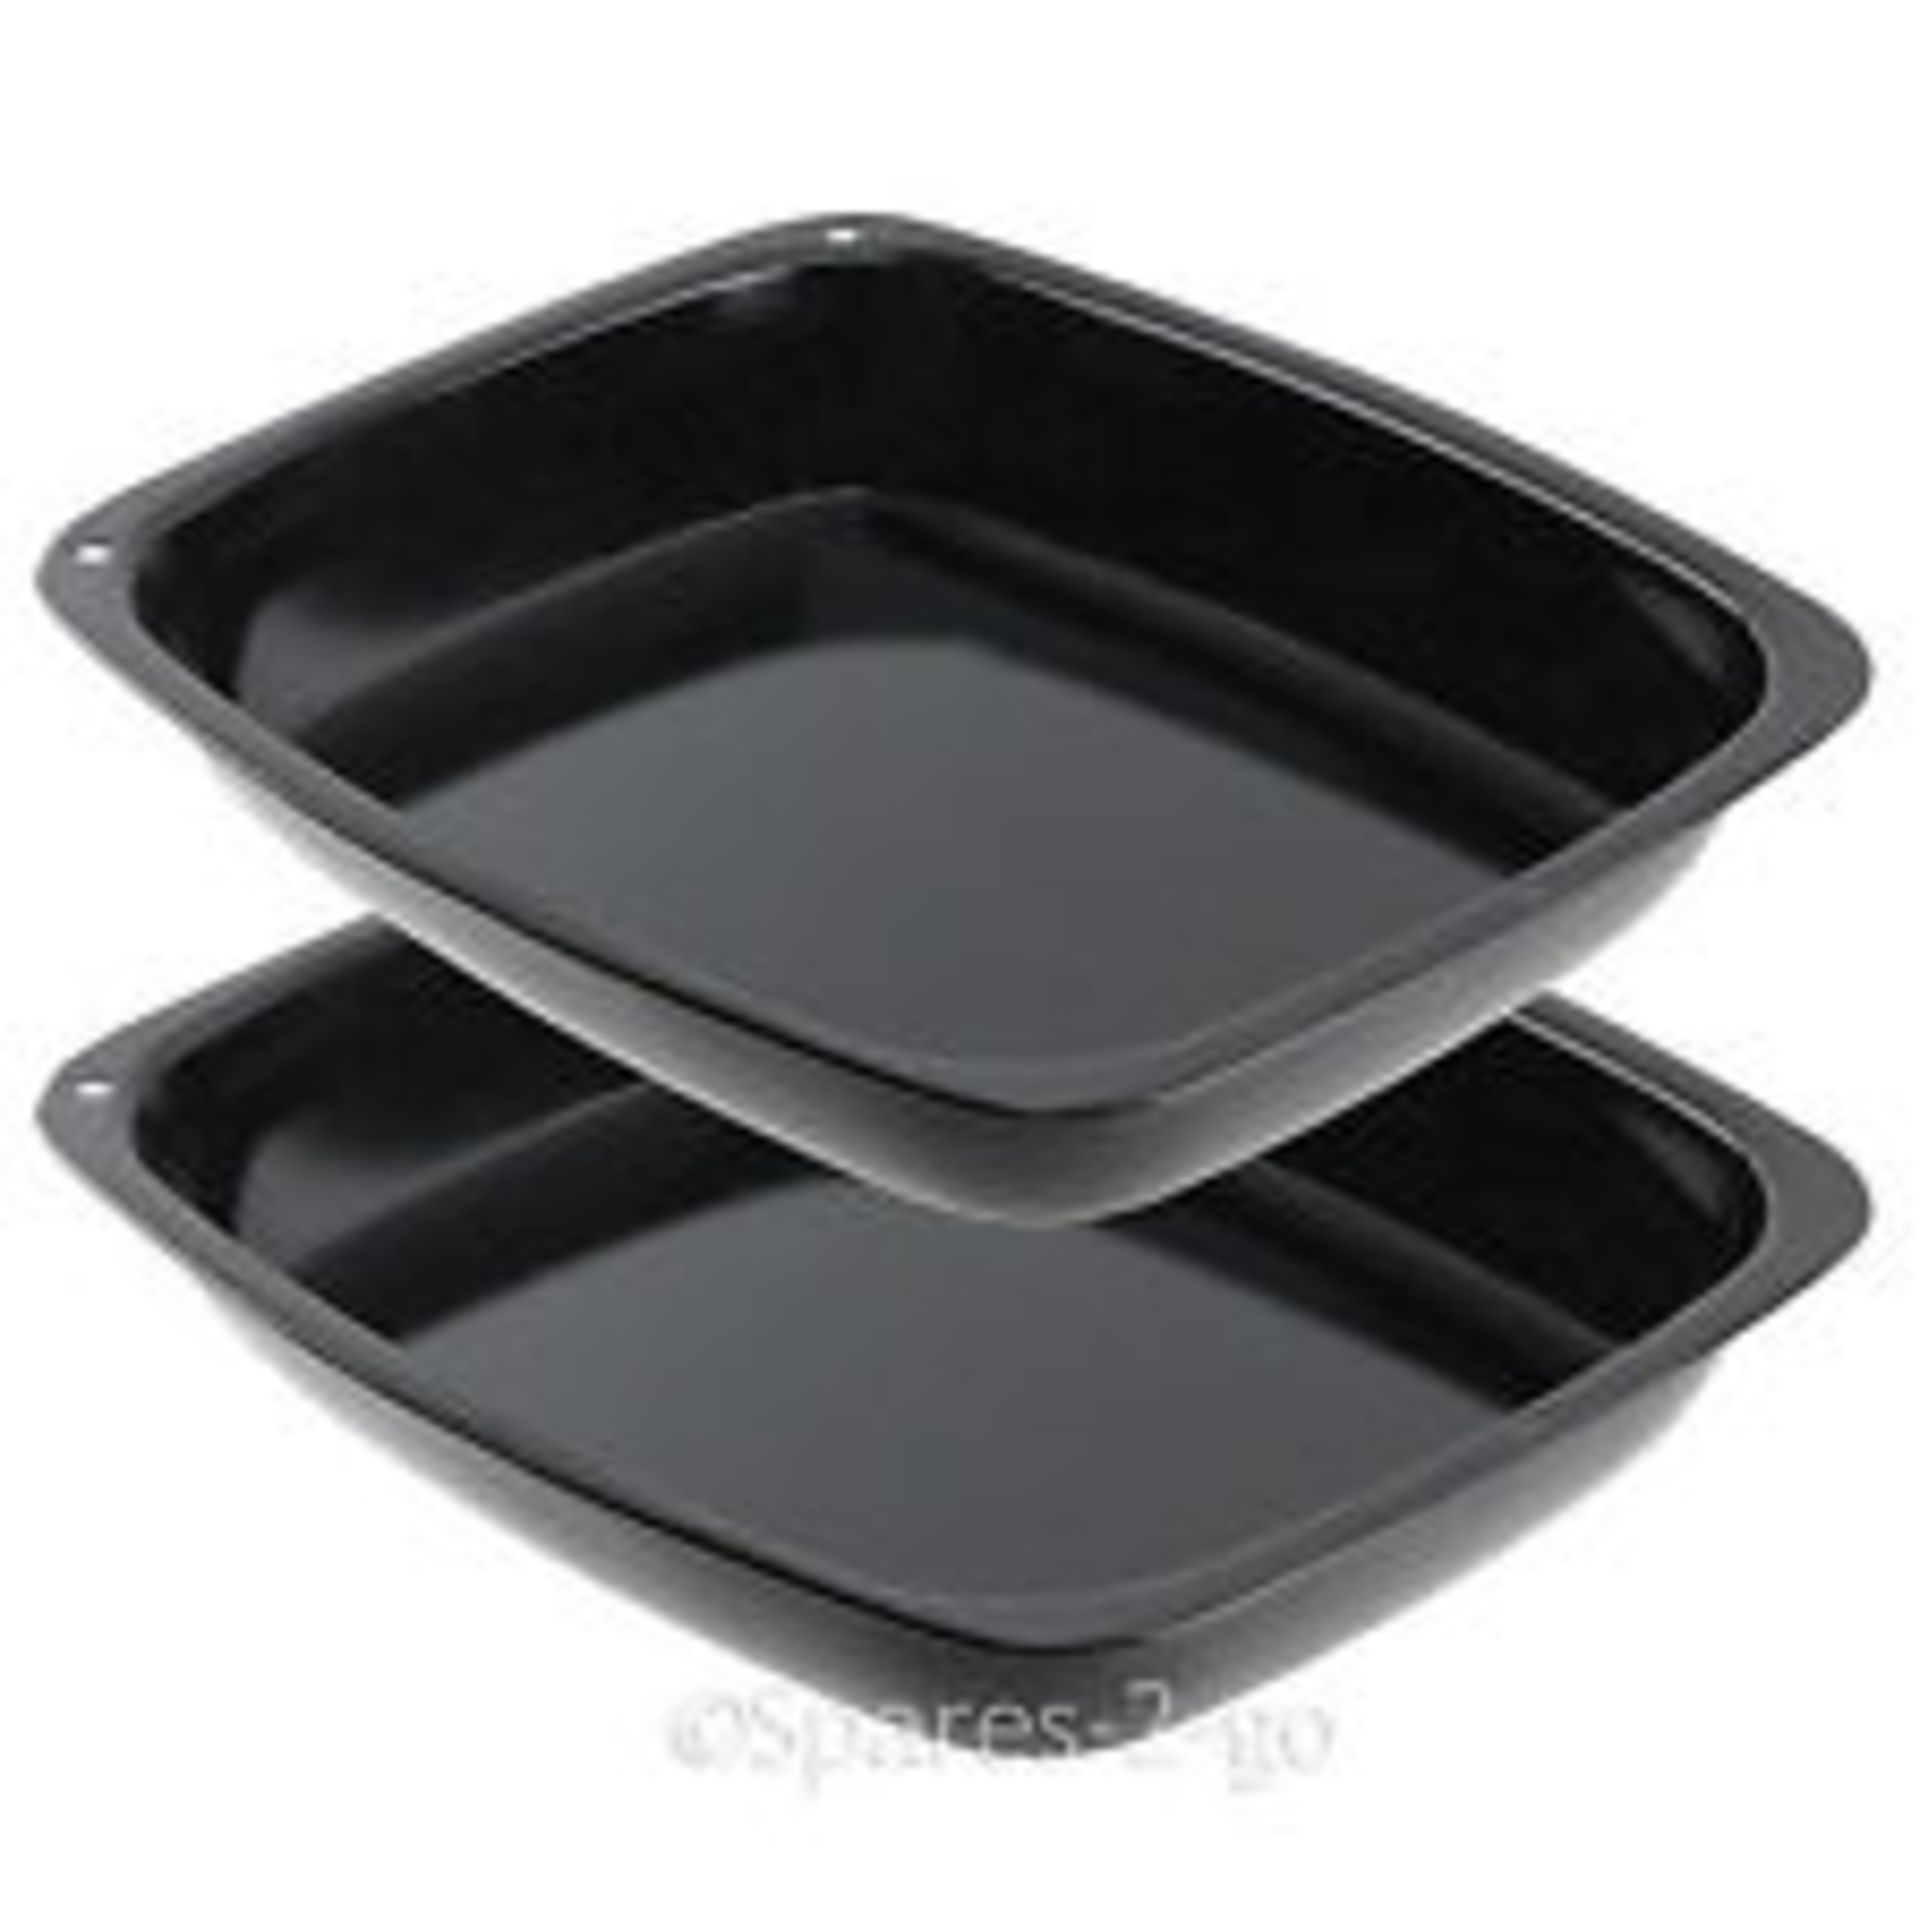 V Brand New Two Enamel Scratch Resistant Dishwasher Safe Roasting Pans X 2 YOUR BID PRICE TO BE